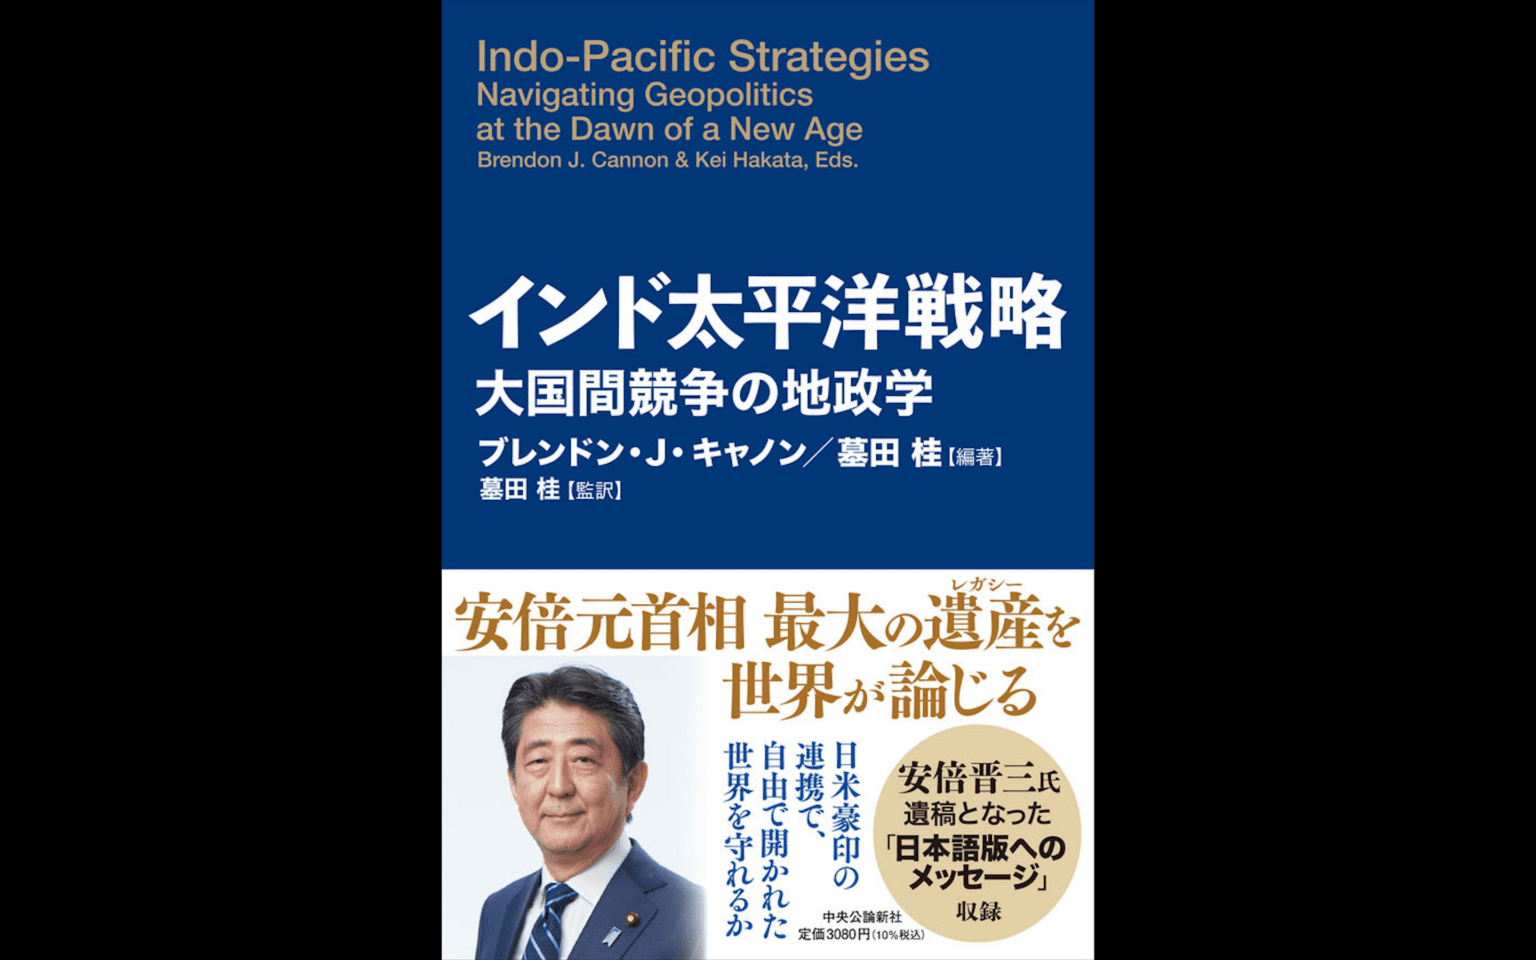 Bringing Close the Free and Open Indo-Pacific